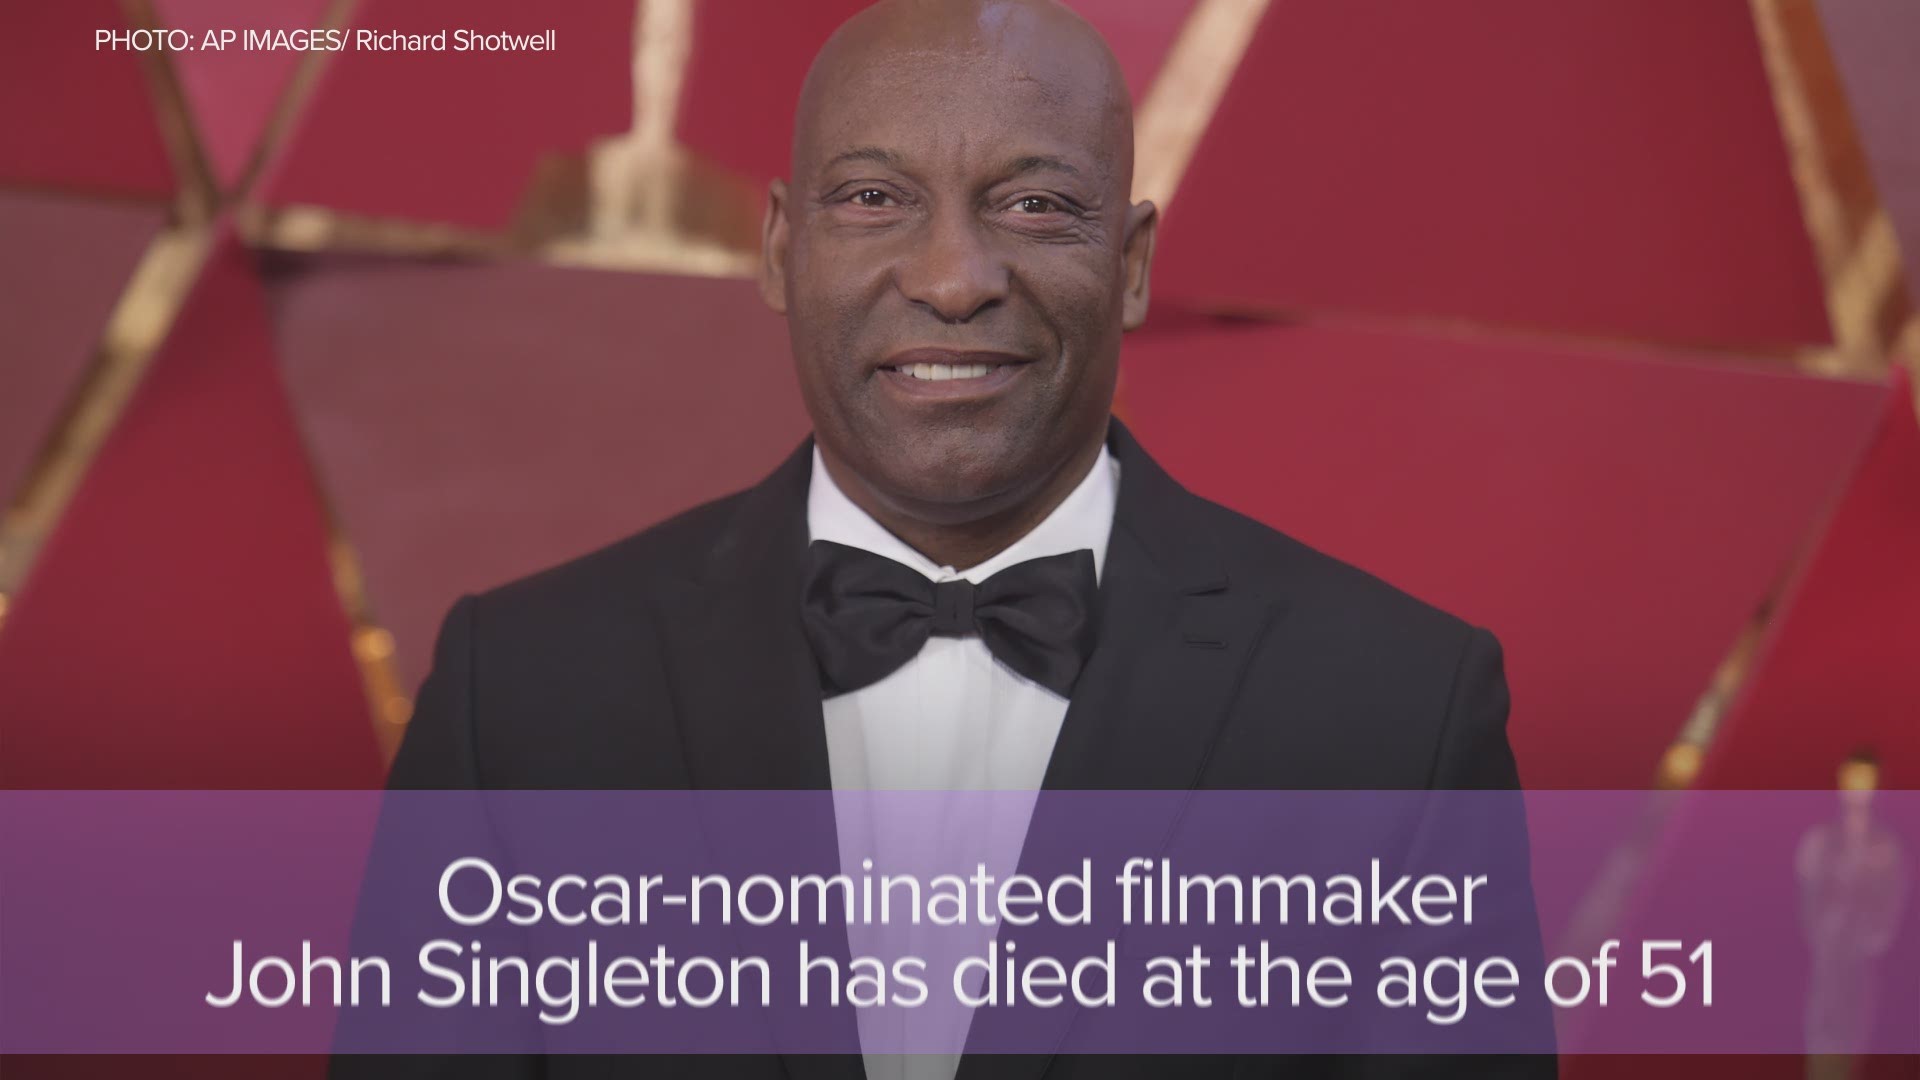 The family for John Singleton said the Oscar-nominated filmmaker has died at the age of 51. He suffered a stroke almost two weeks ago.